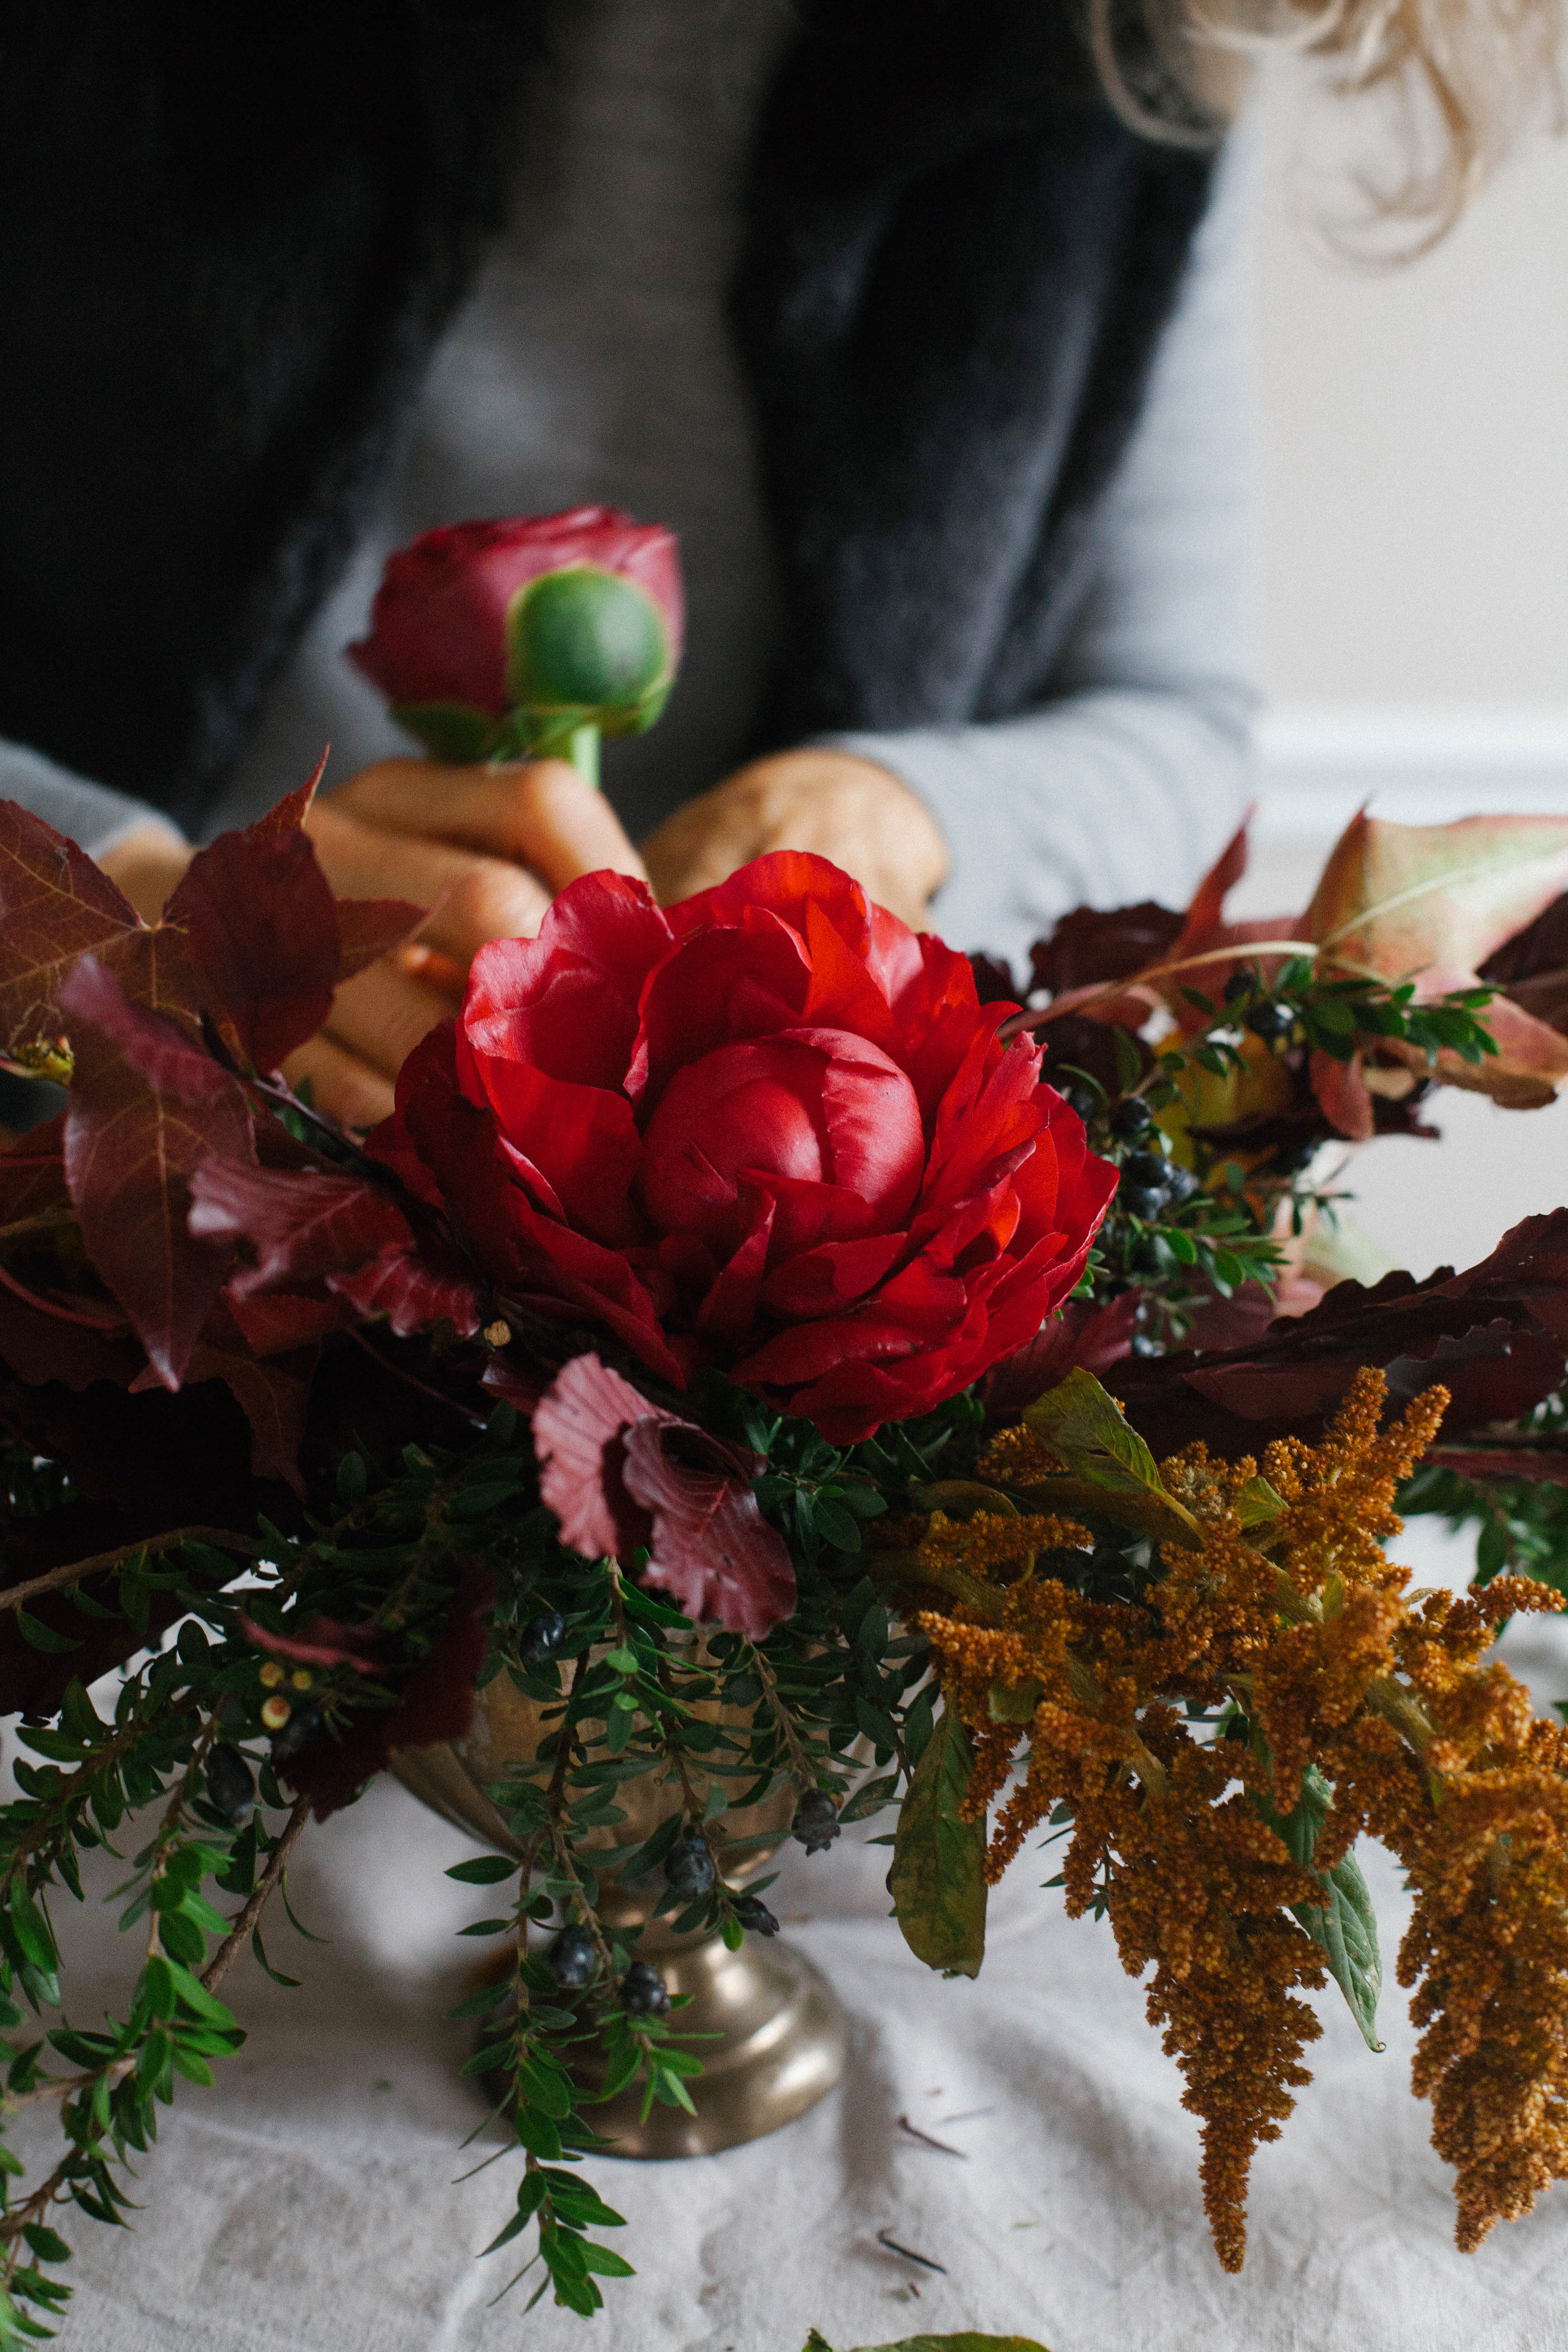 A Daily Something | Wintry Floral Centerpiece